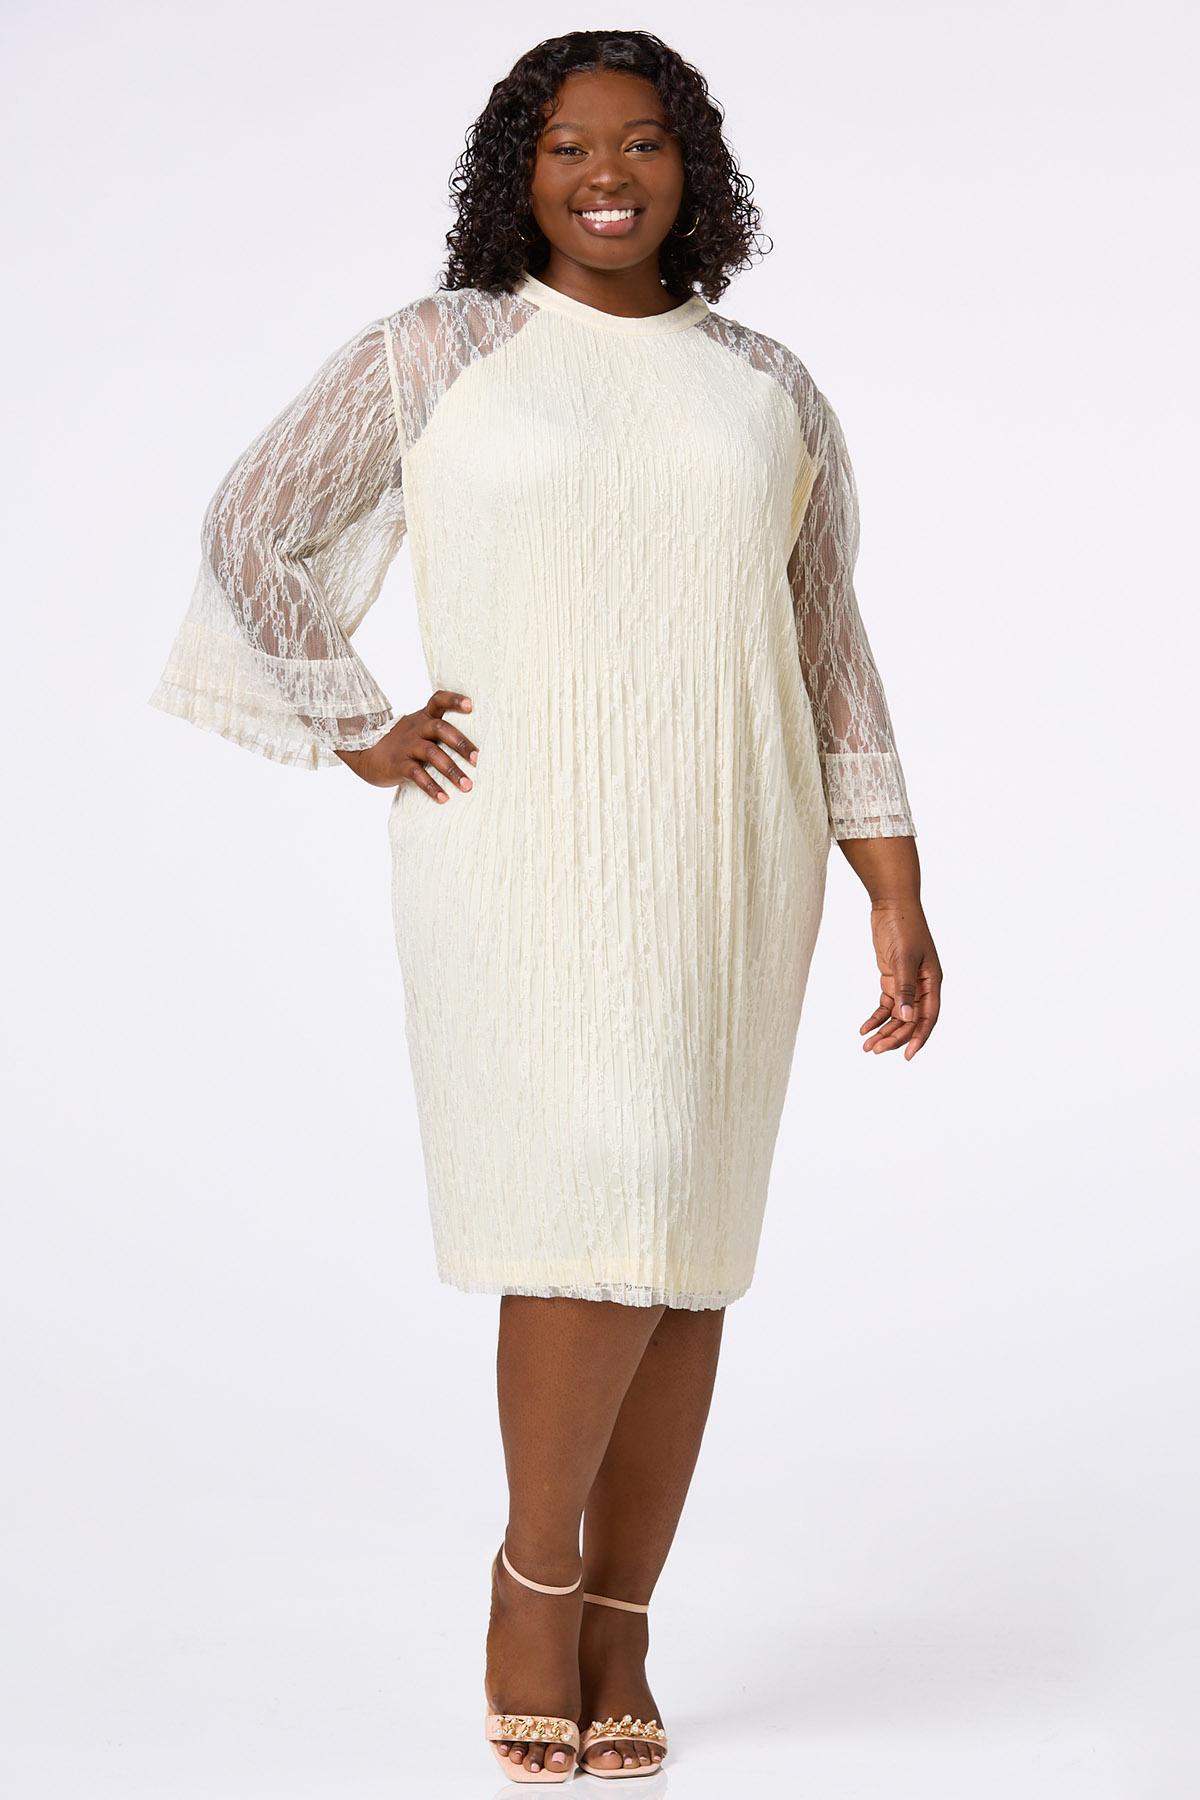 plus size dresses with sleeves